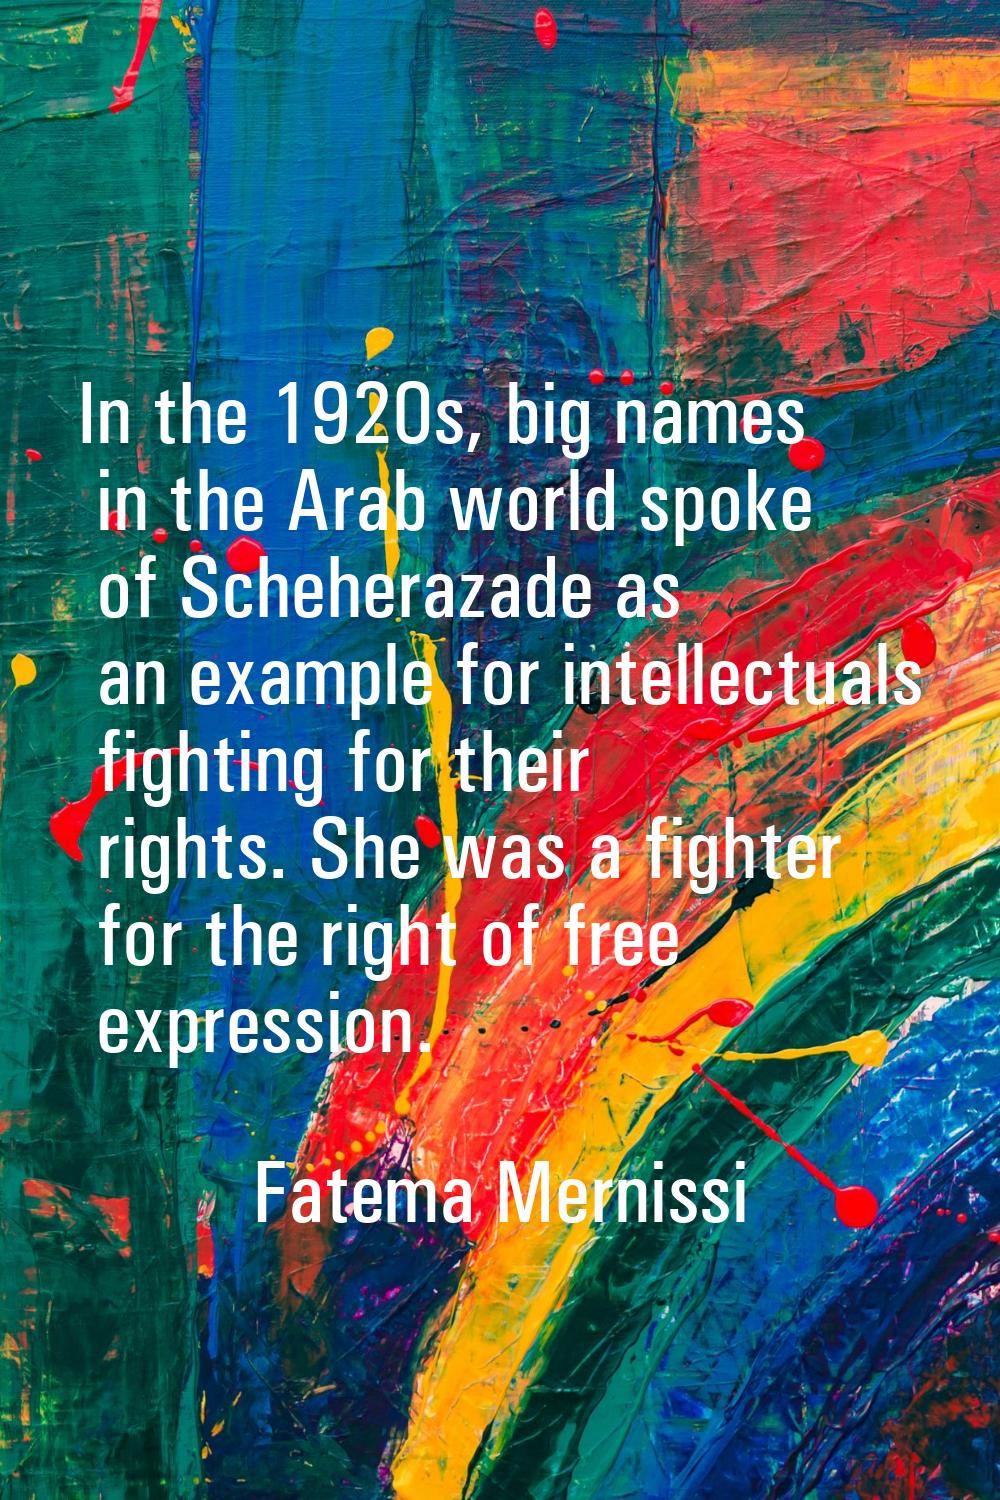 In the 1920s, big names in the Arab world spoke of Scheherazade as an example for intellectuals fig